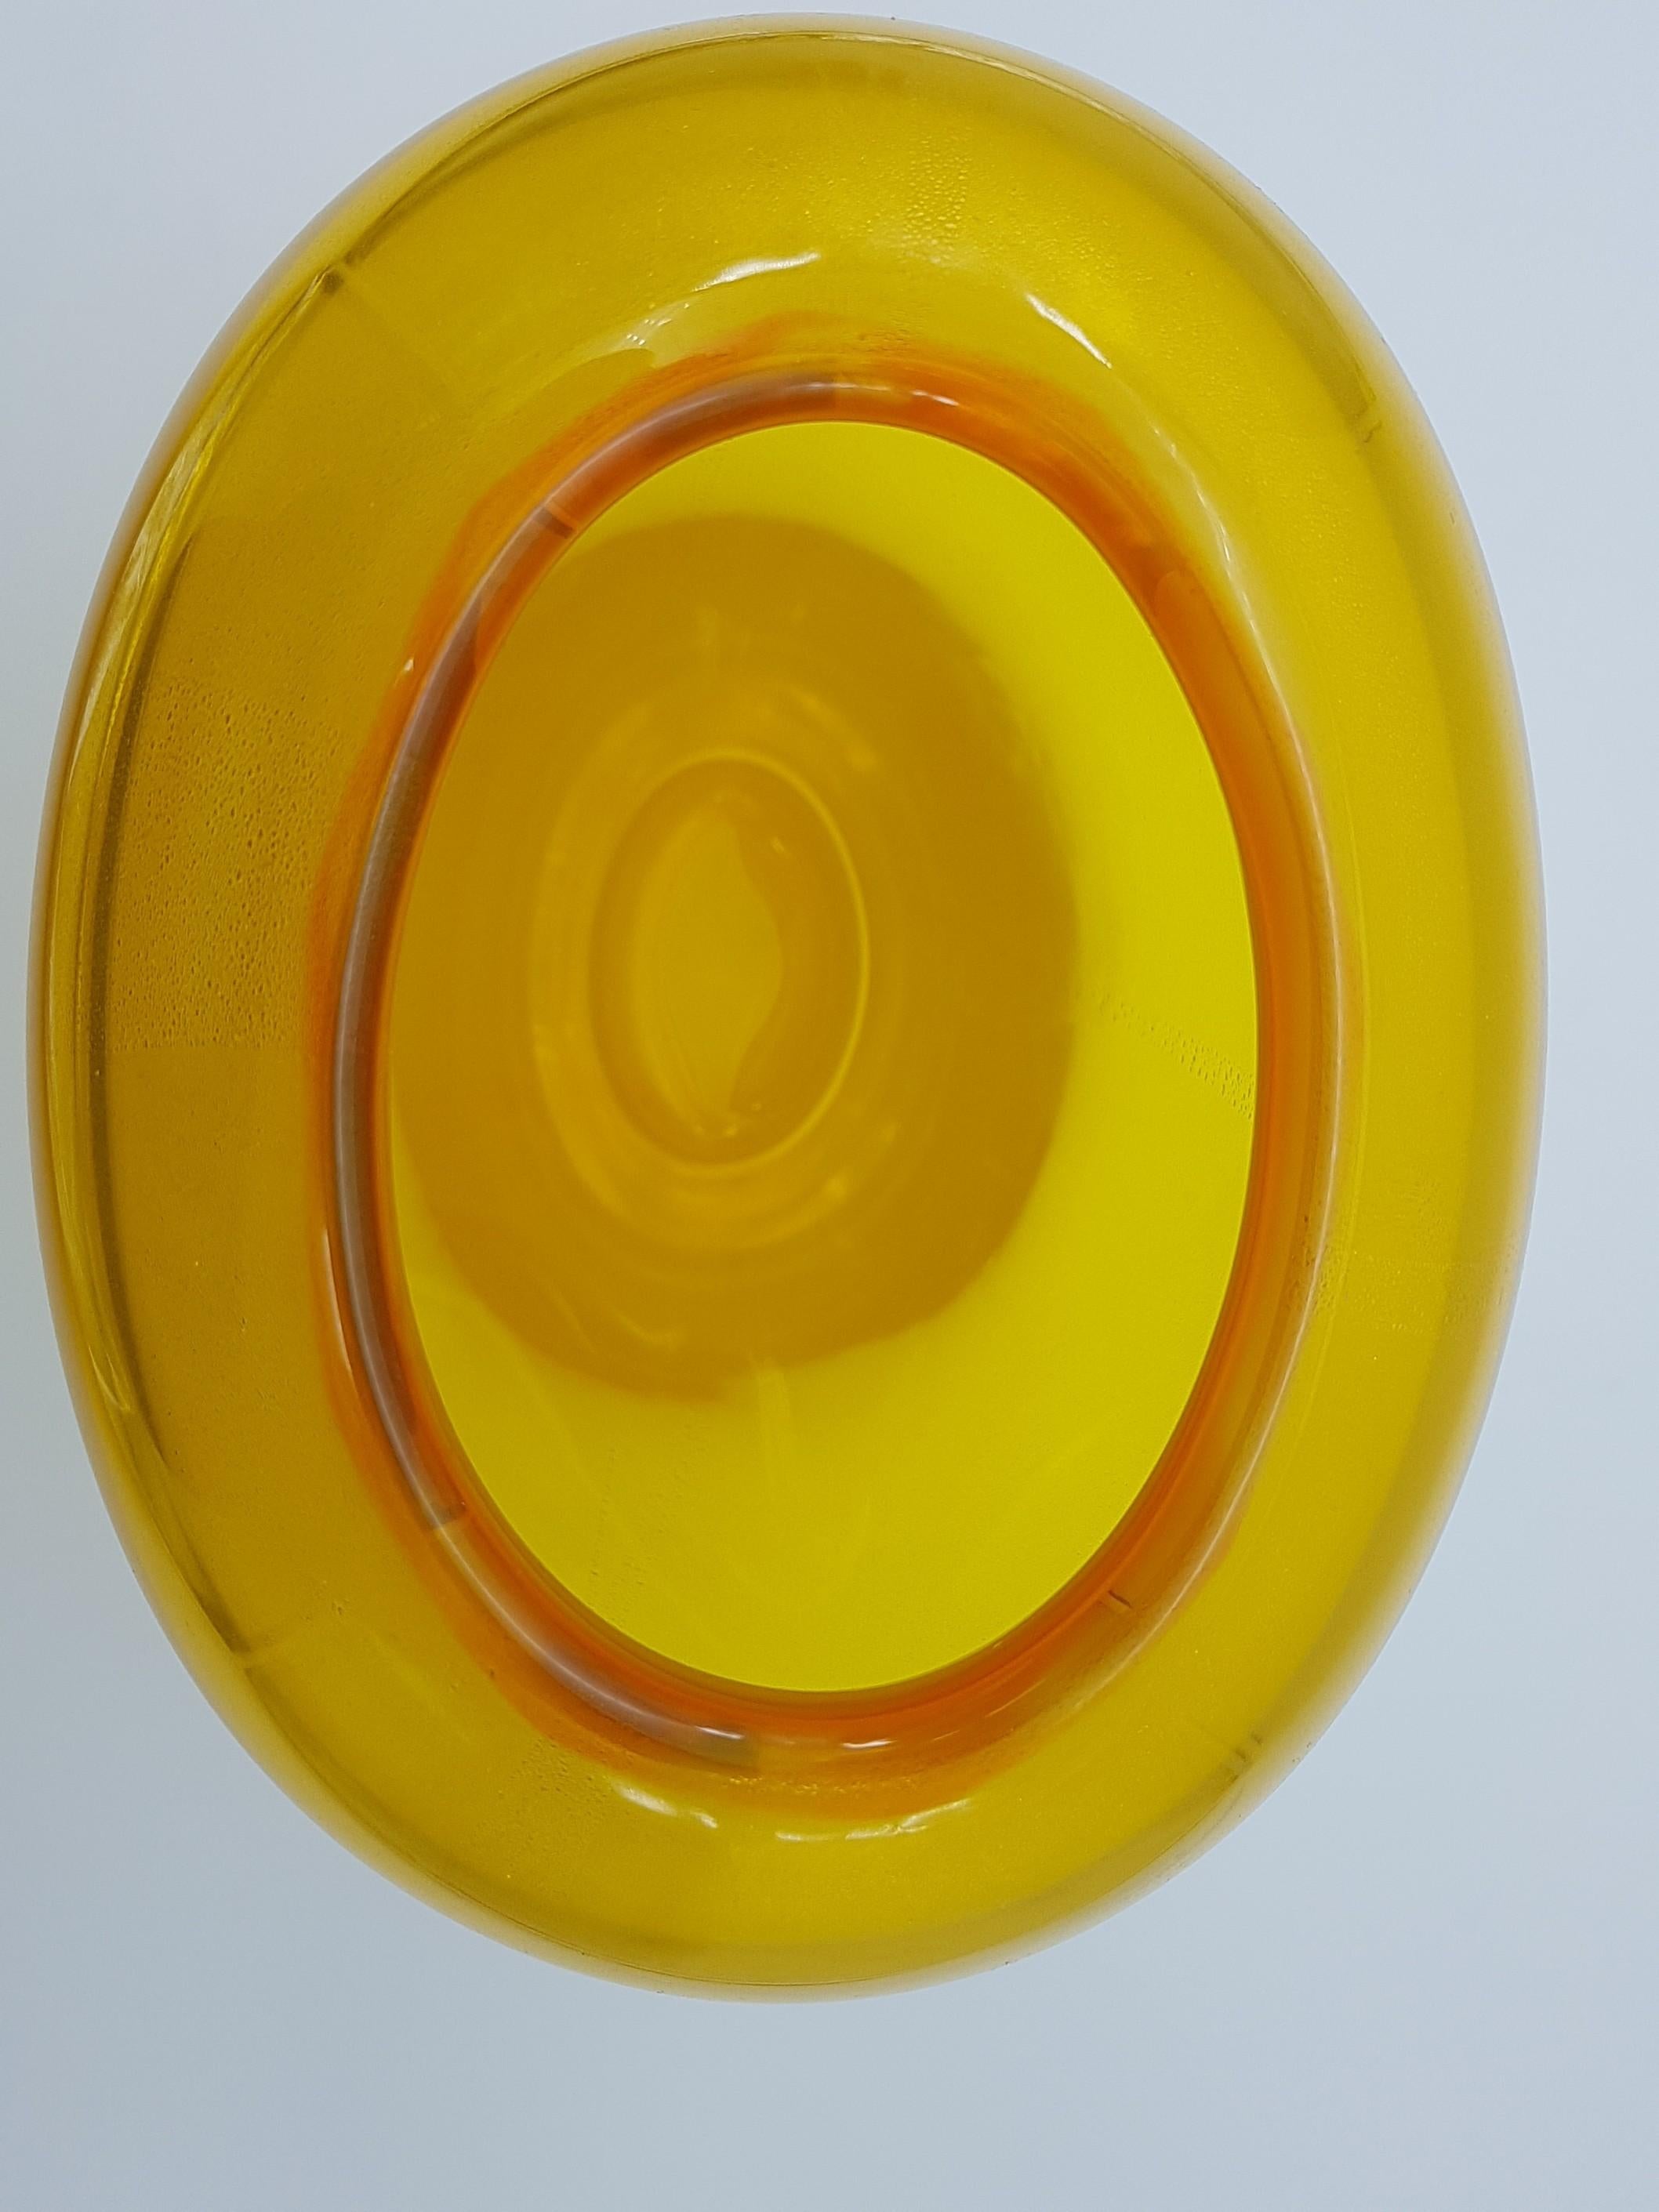 Modern Murano Glass Vase Gold Yellow Color by Cenedese, Late 1990s For Sale 8